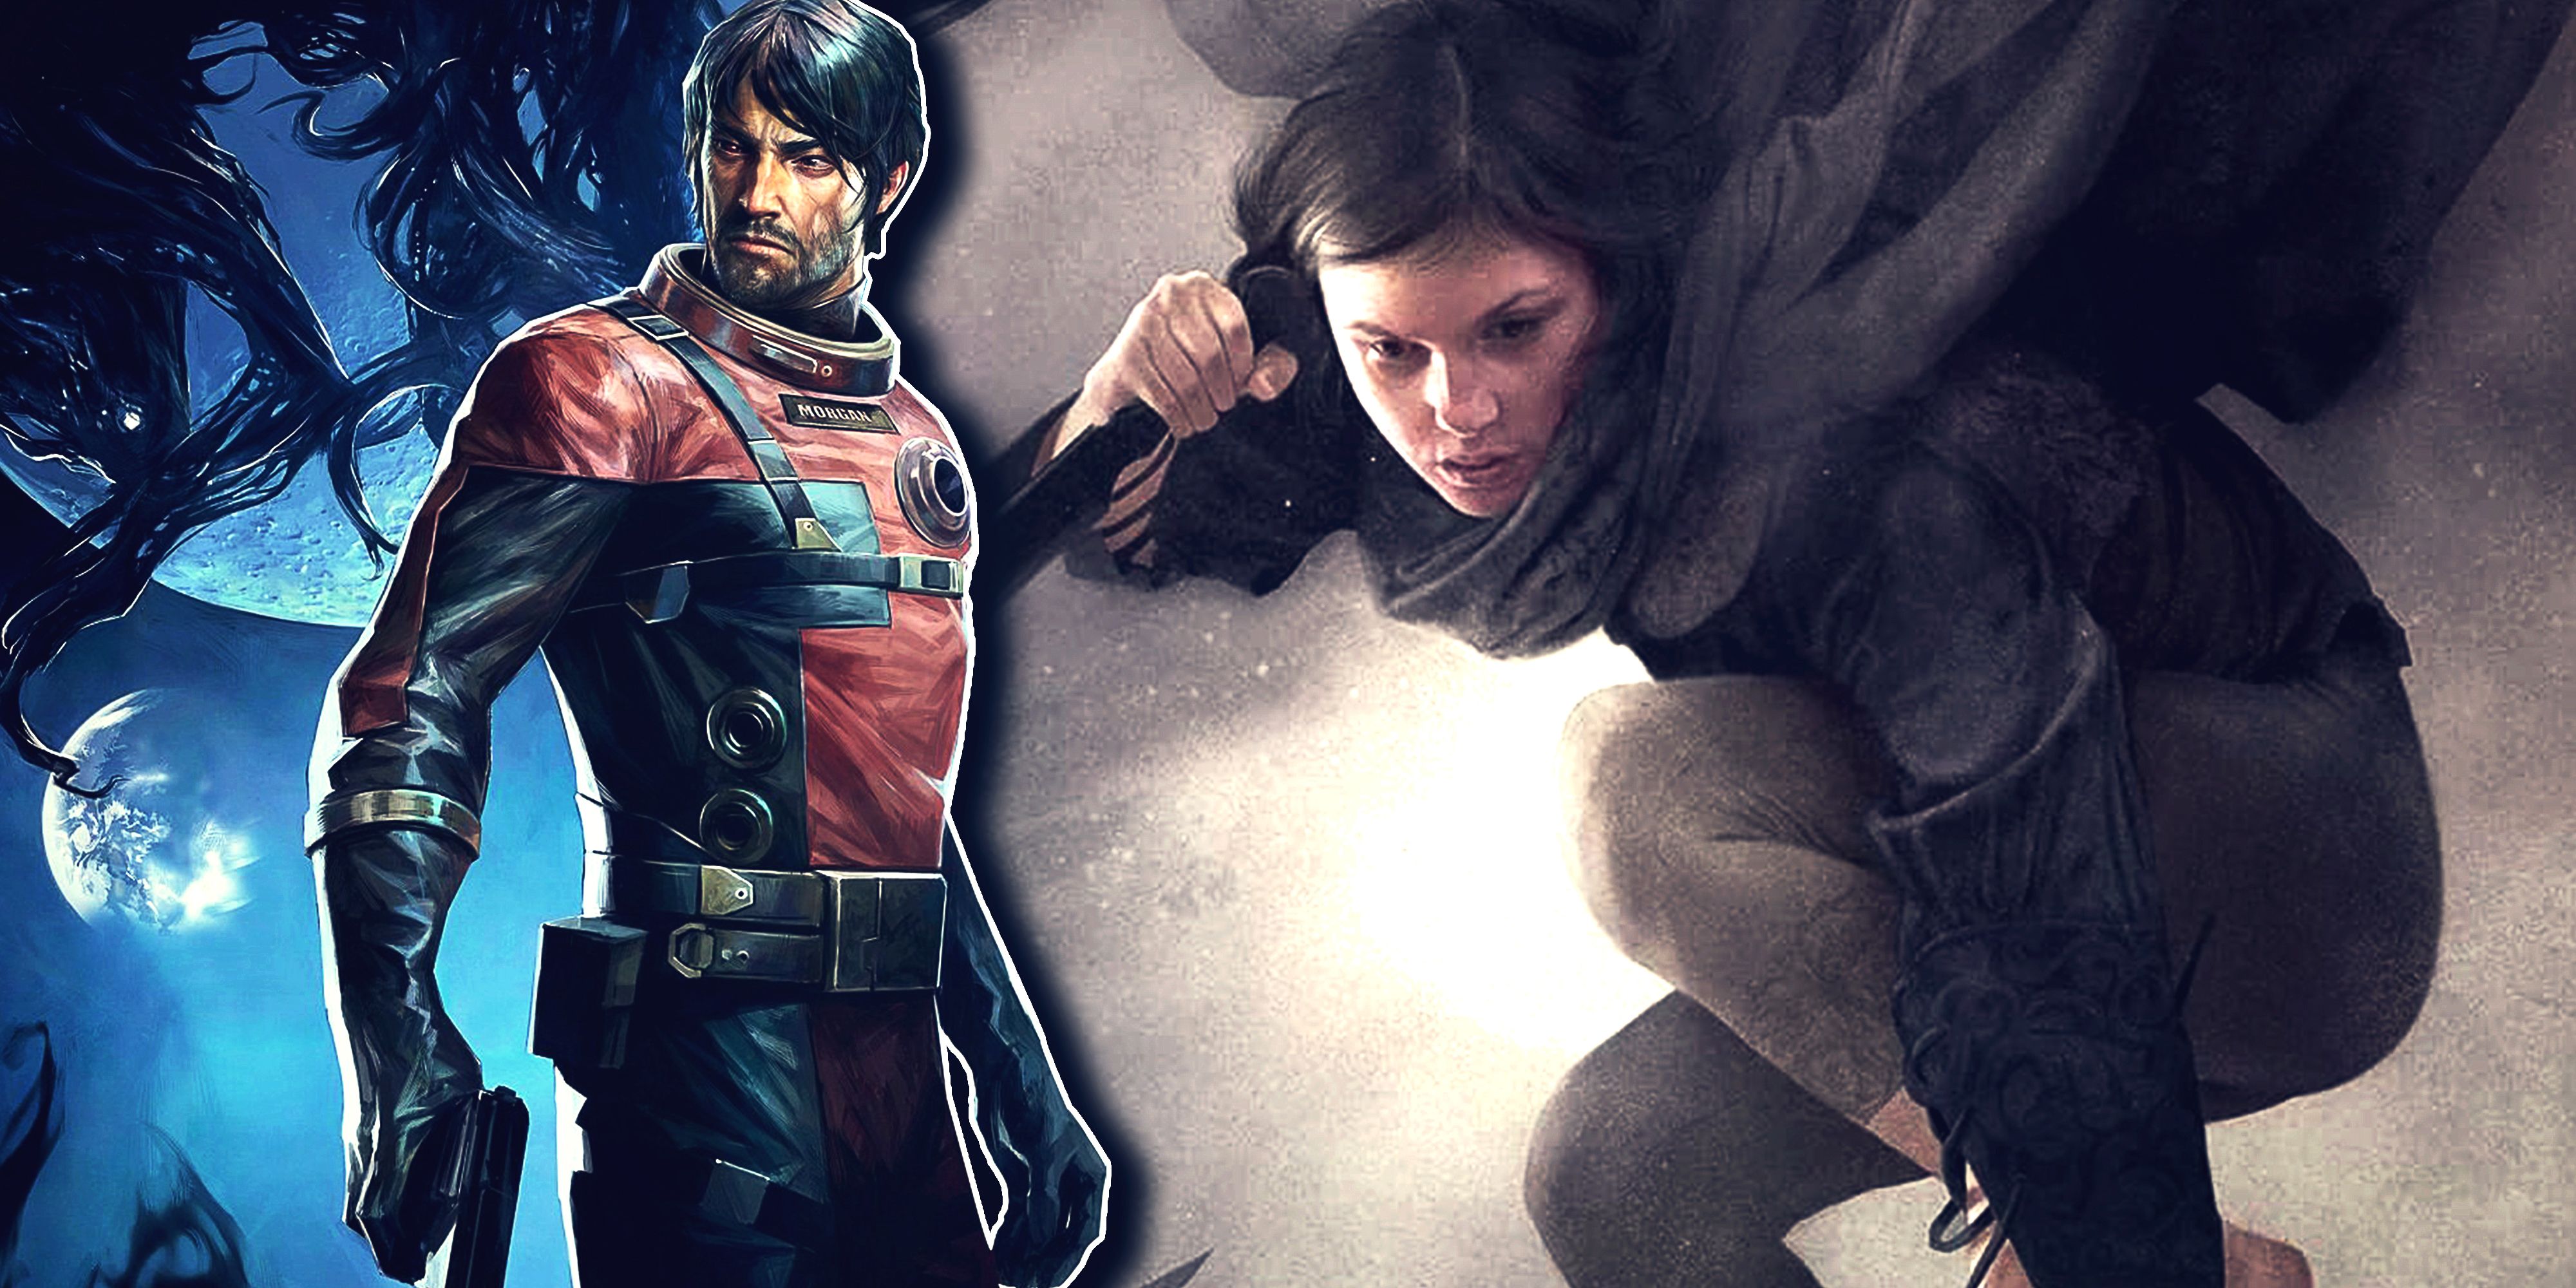 Split image with Morgan Yu from Prey and Vin from the cover of Mistborn: The Final Empire.